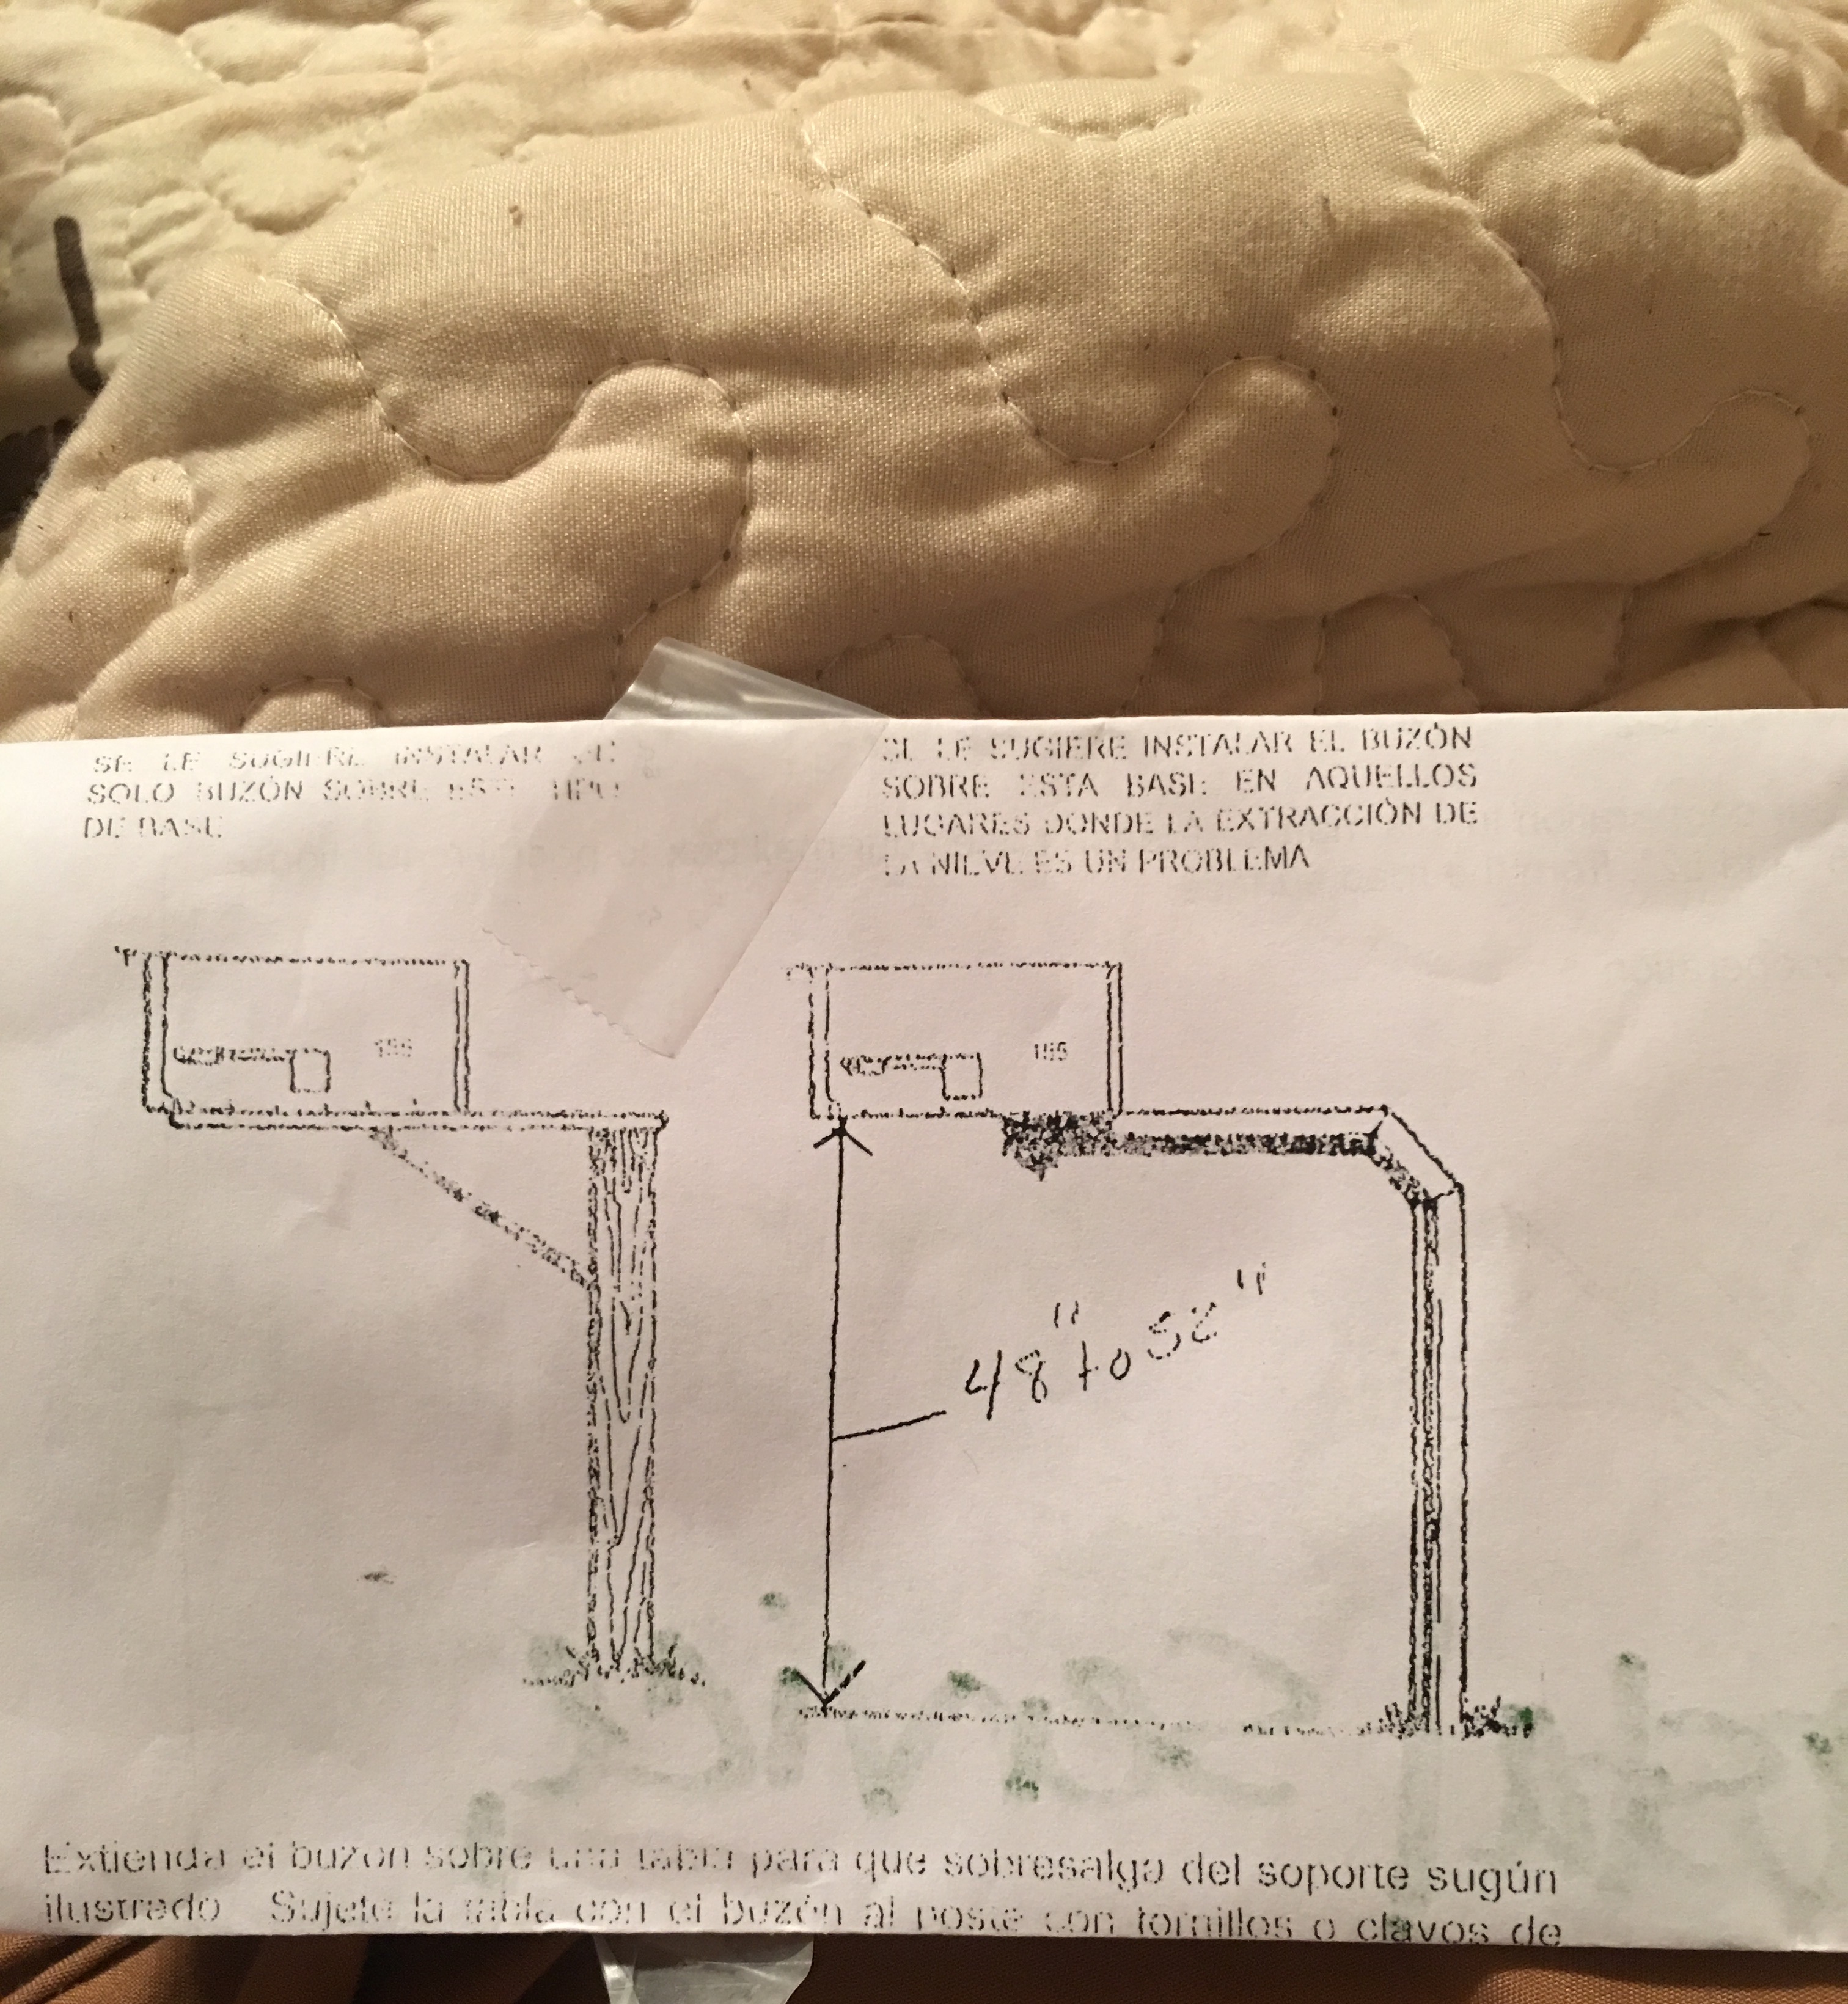 The diagram with their handwritten in regulations on the back of the letter